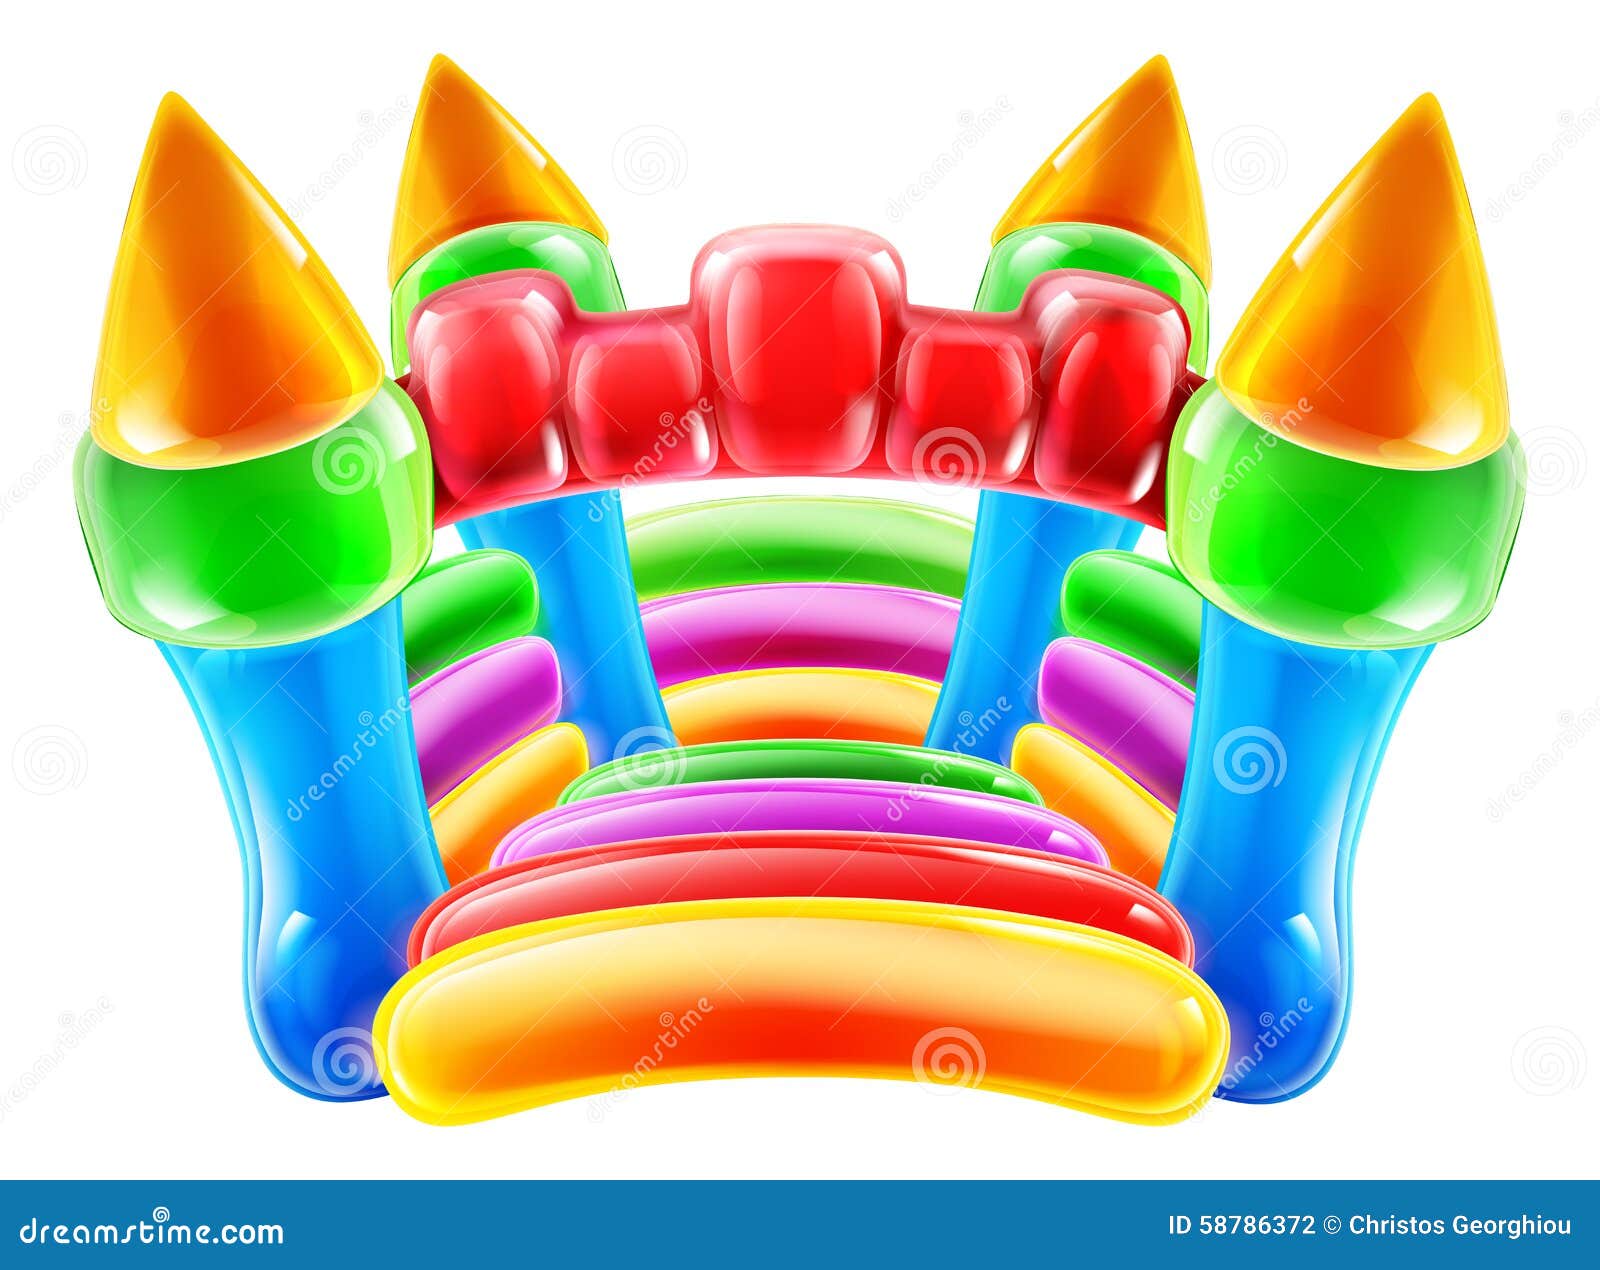 jumping castle clipart - photo #35